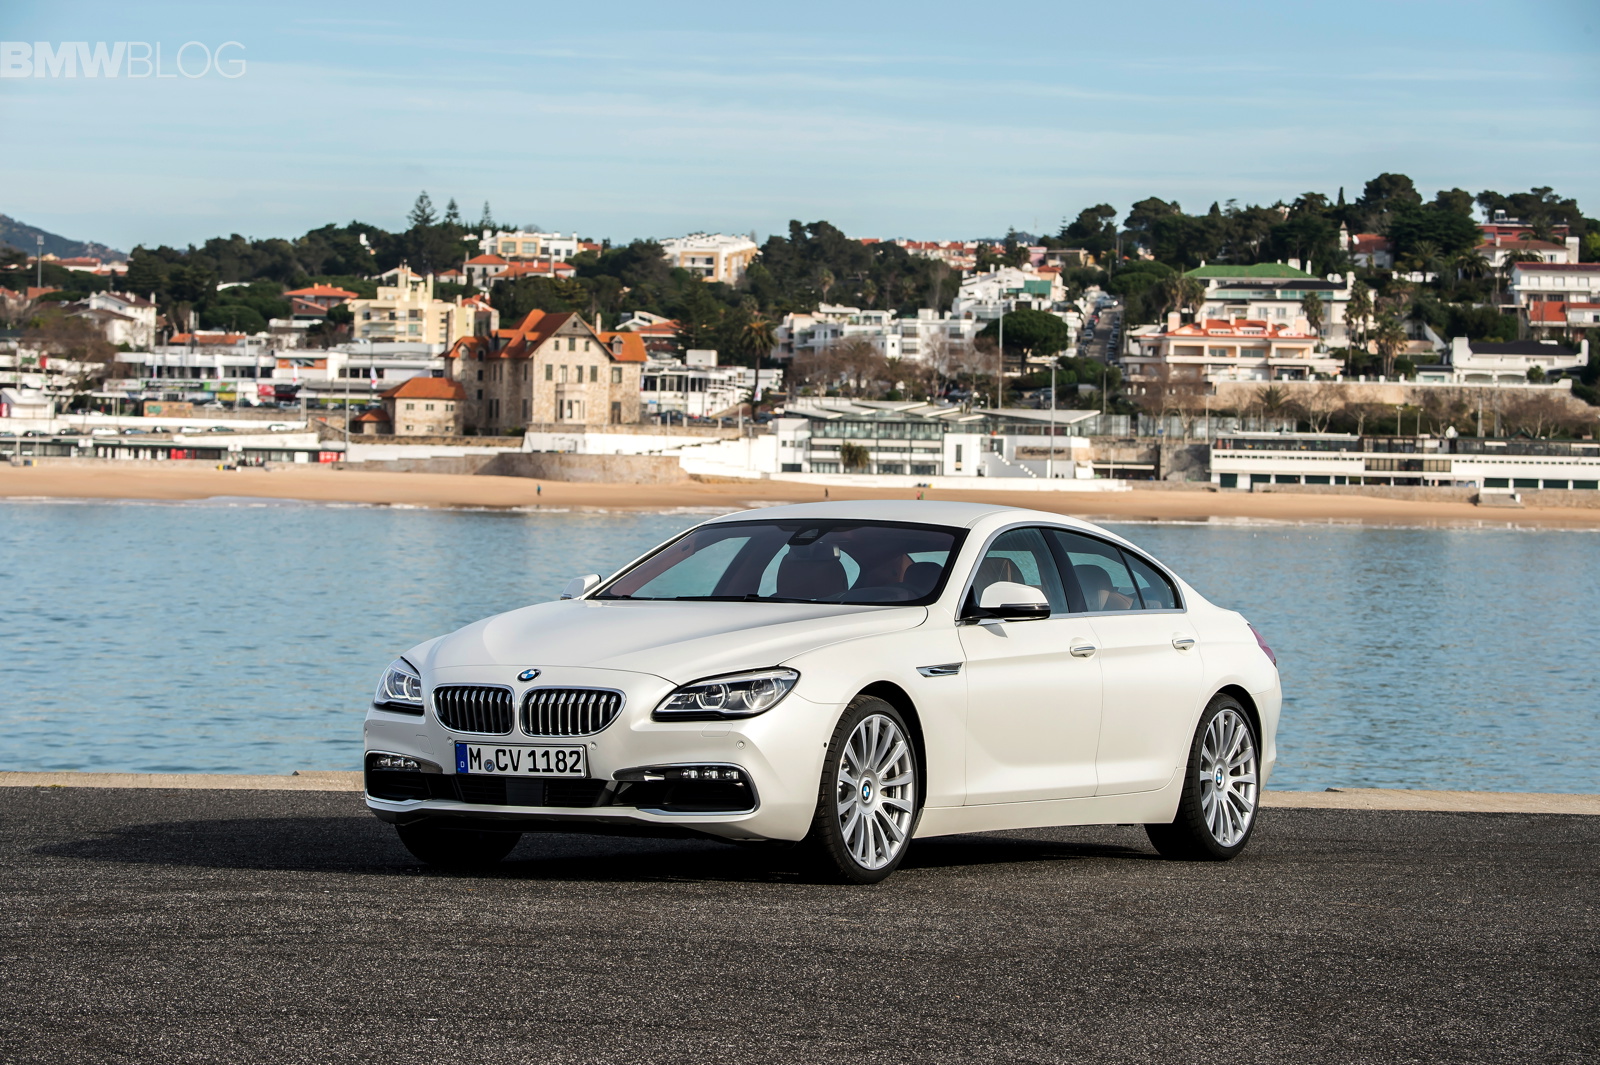 Will the BMW 6 Series Gran Coupe become a future classic?